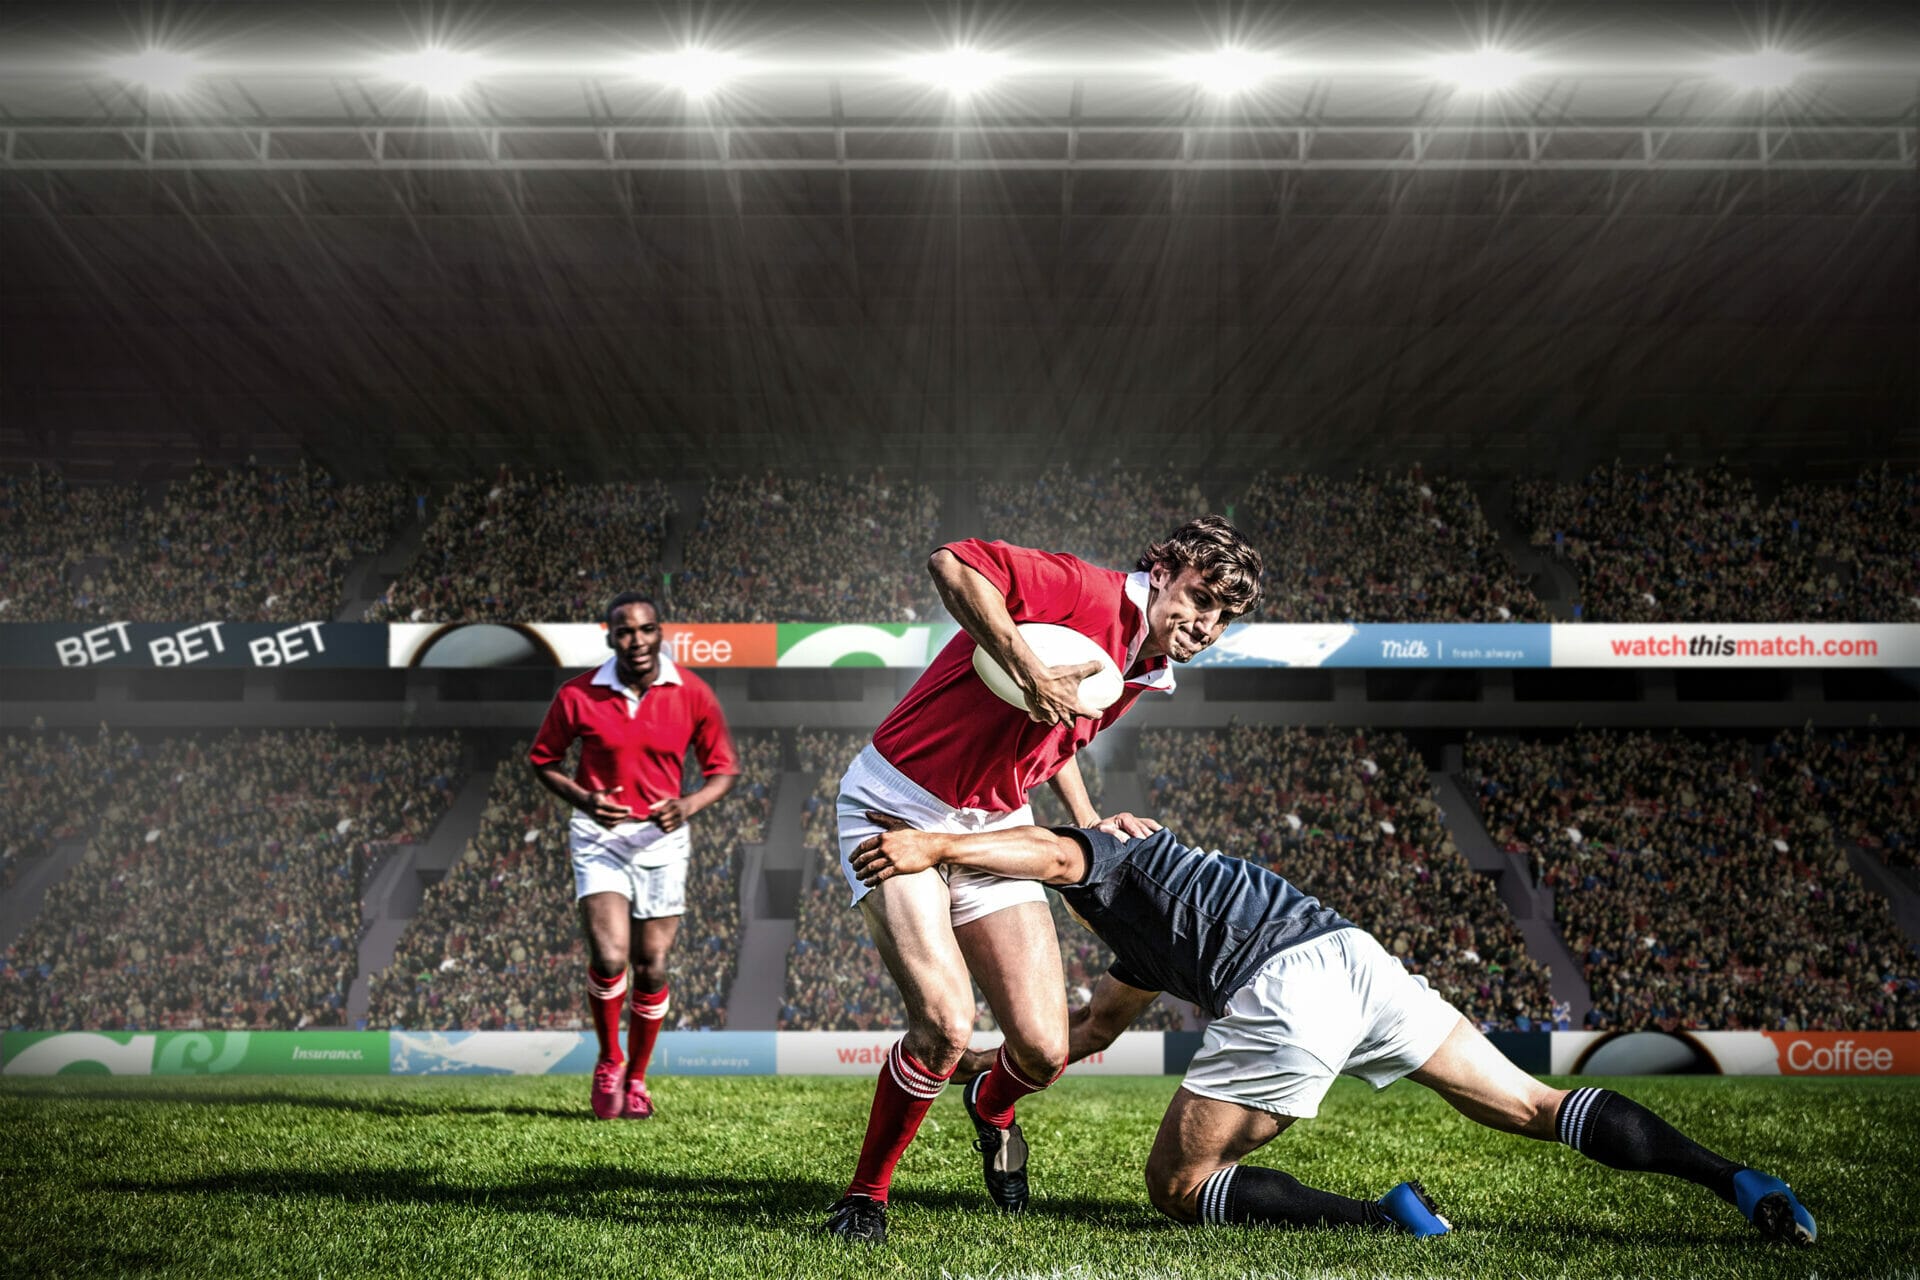 Top 10 sporting events in the UK